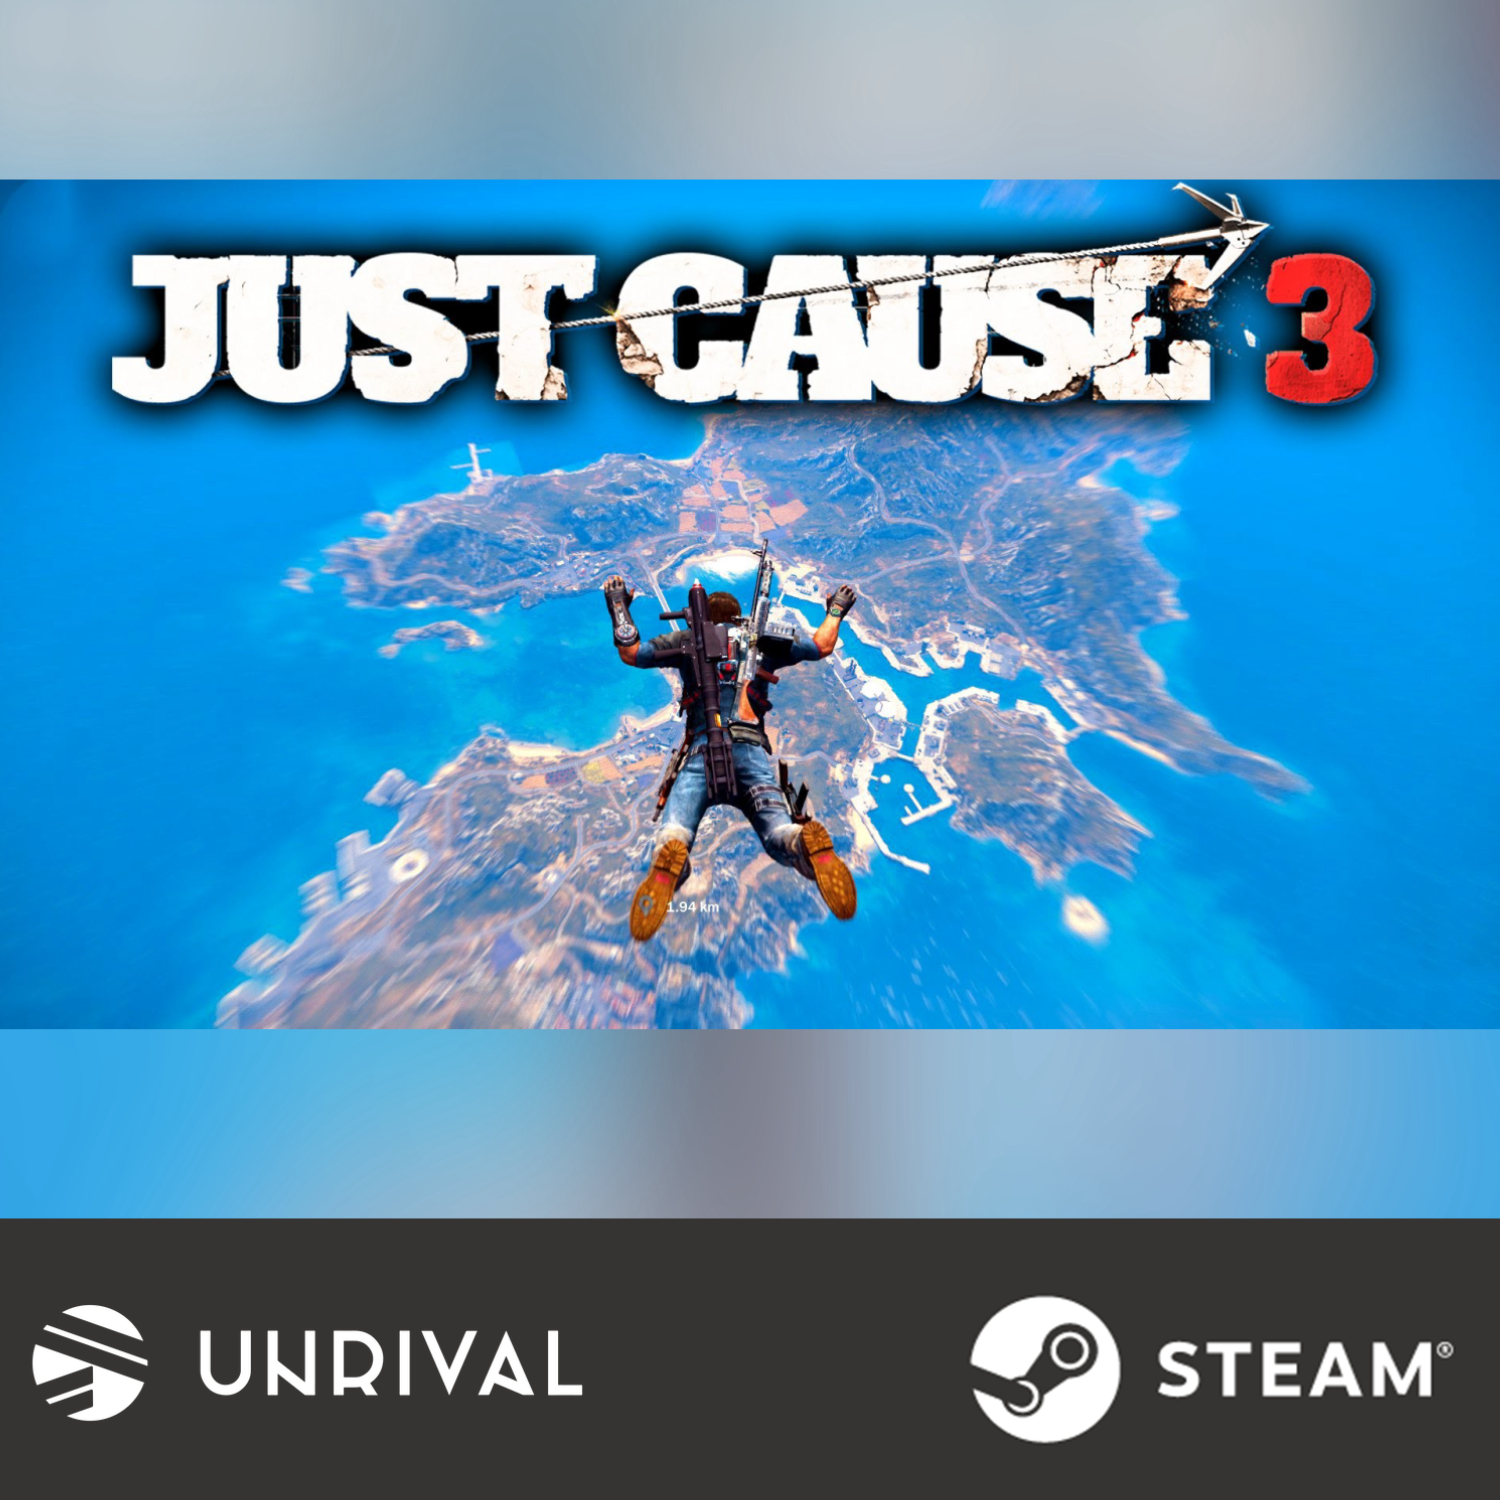 Just Cause 3 PC Digital Download Game (Single Player) - Unrival